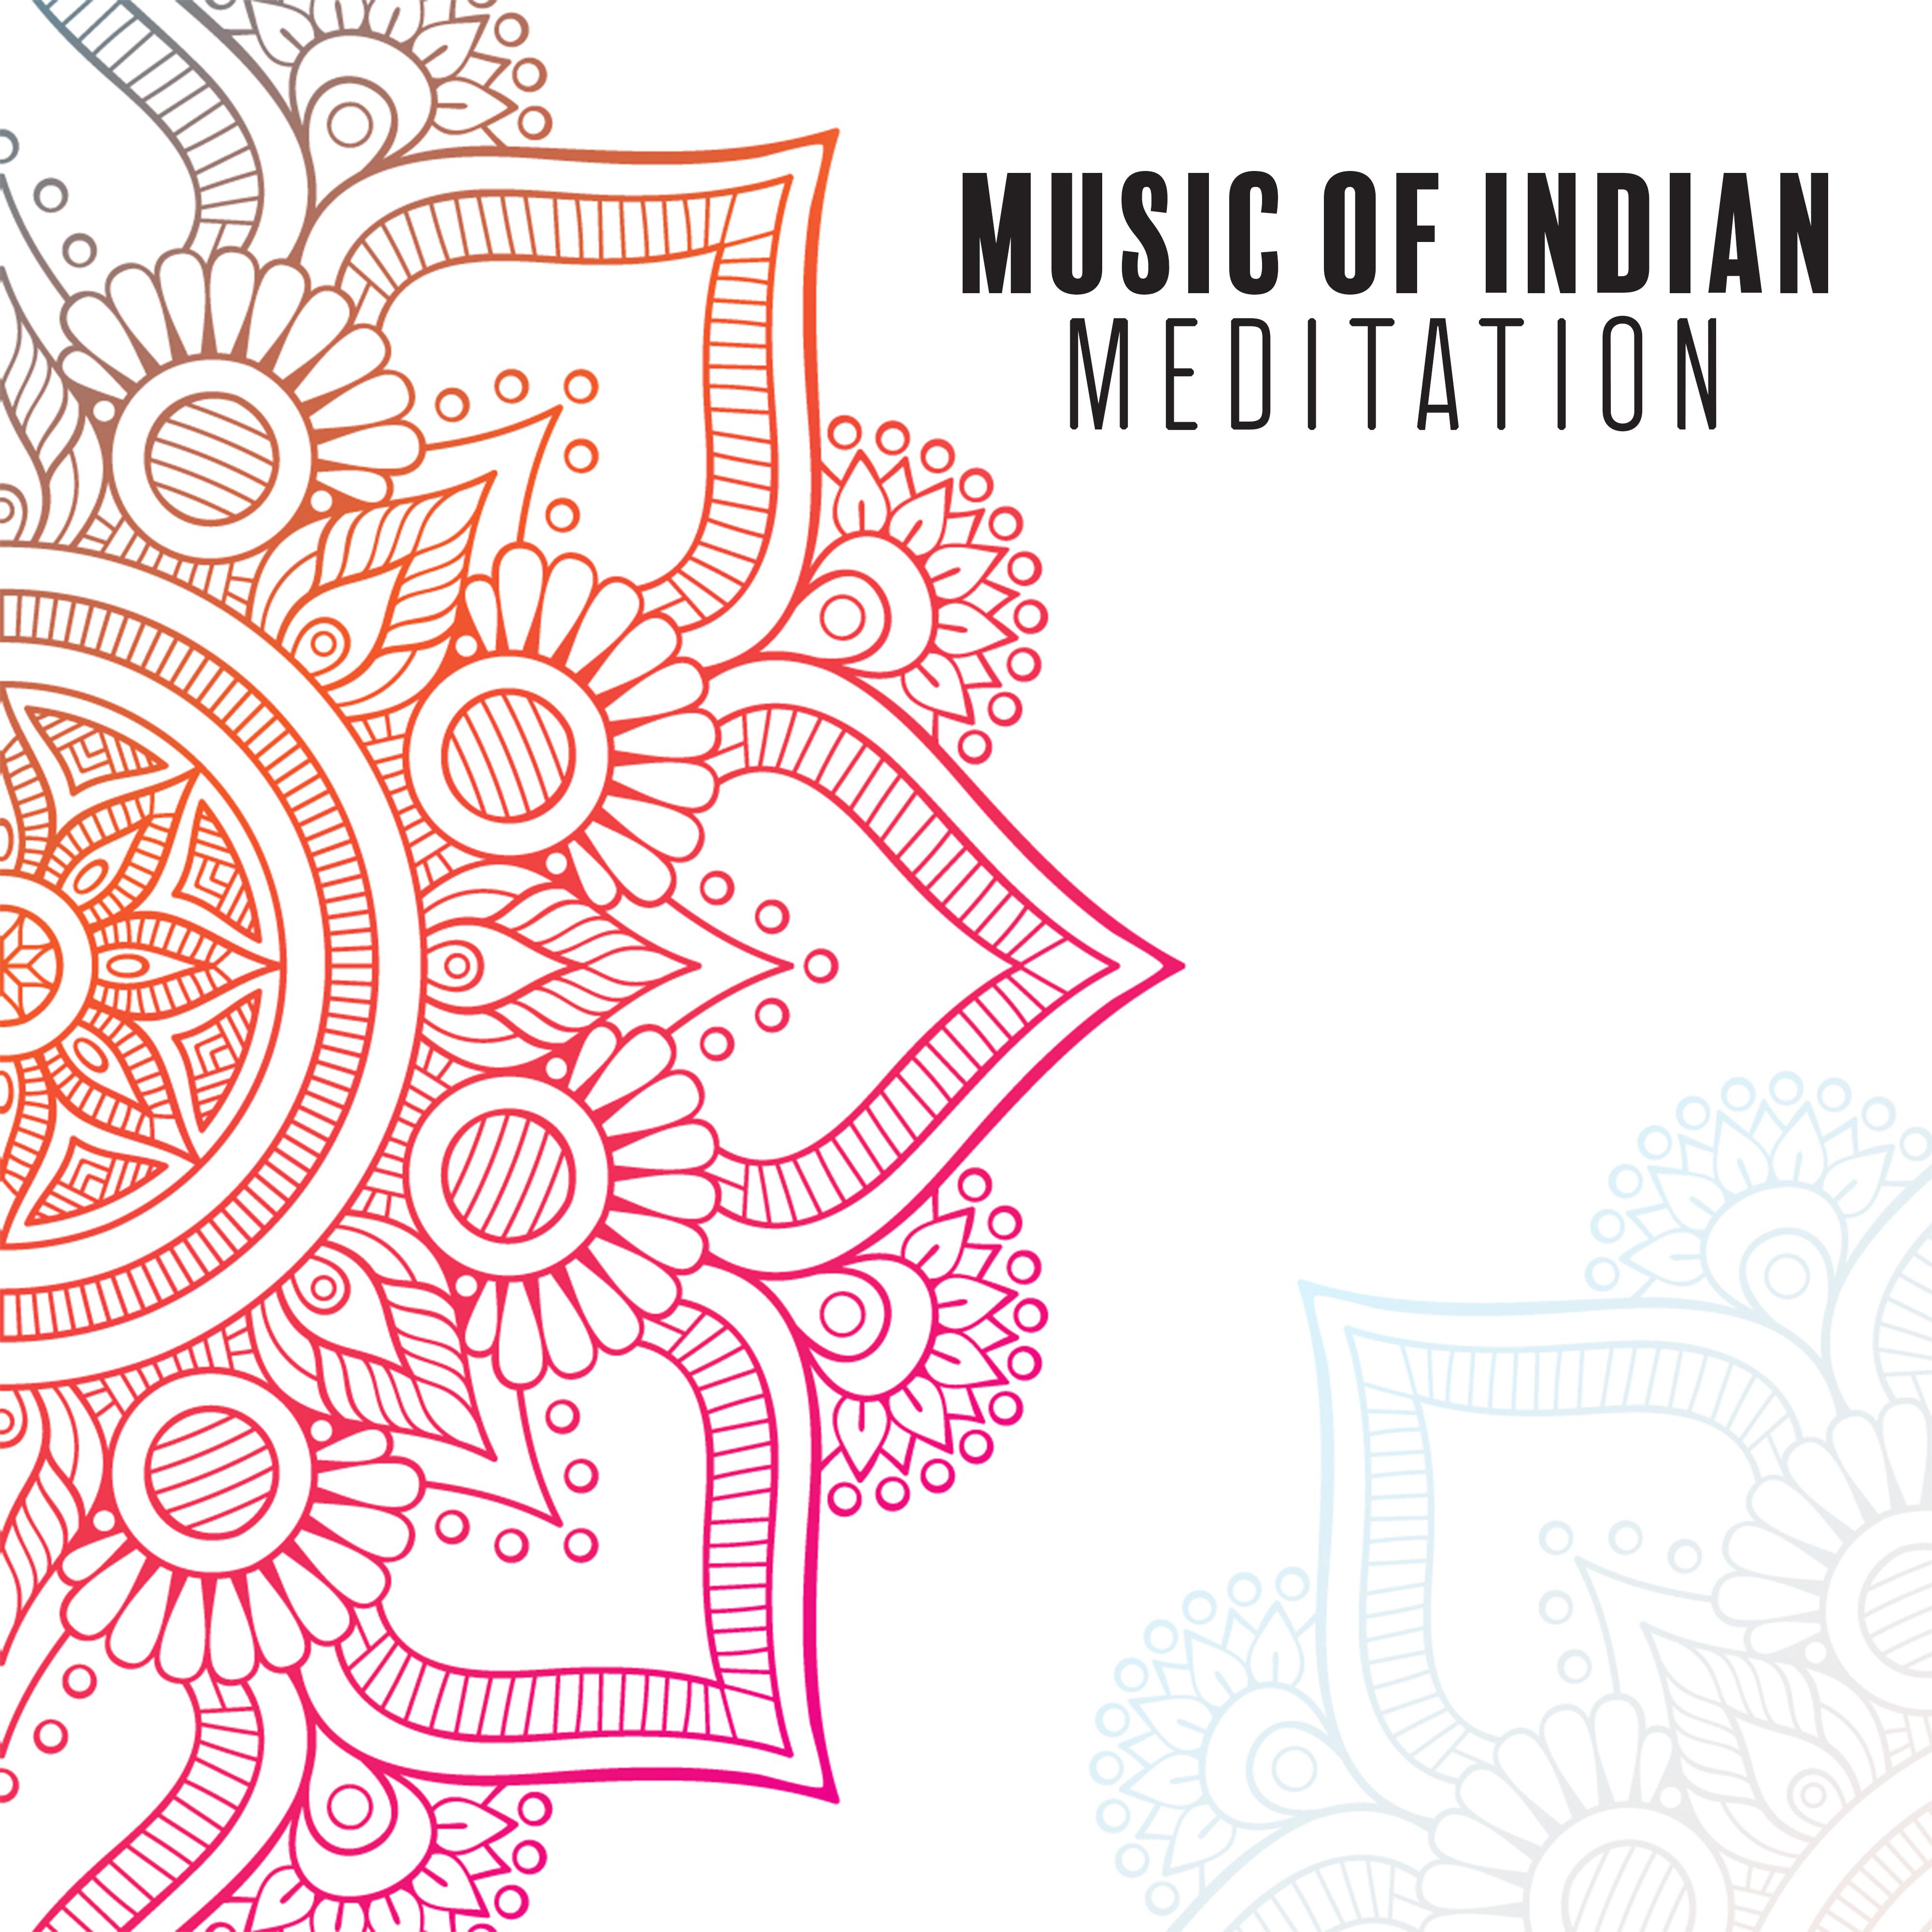 Music of Indian Meditation: 15 Hindu New Age Songs for Deep Yoga Session and Relaxation of Body & Soul